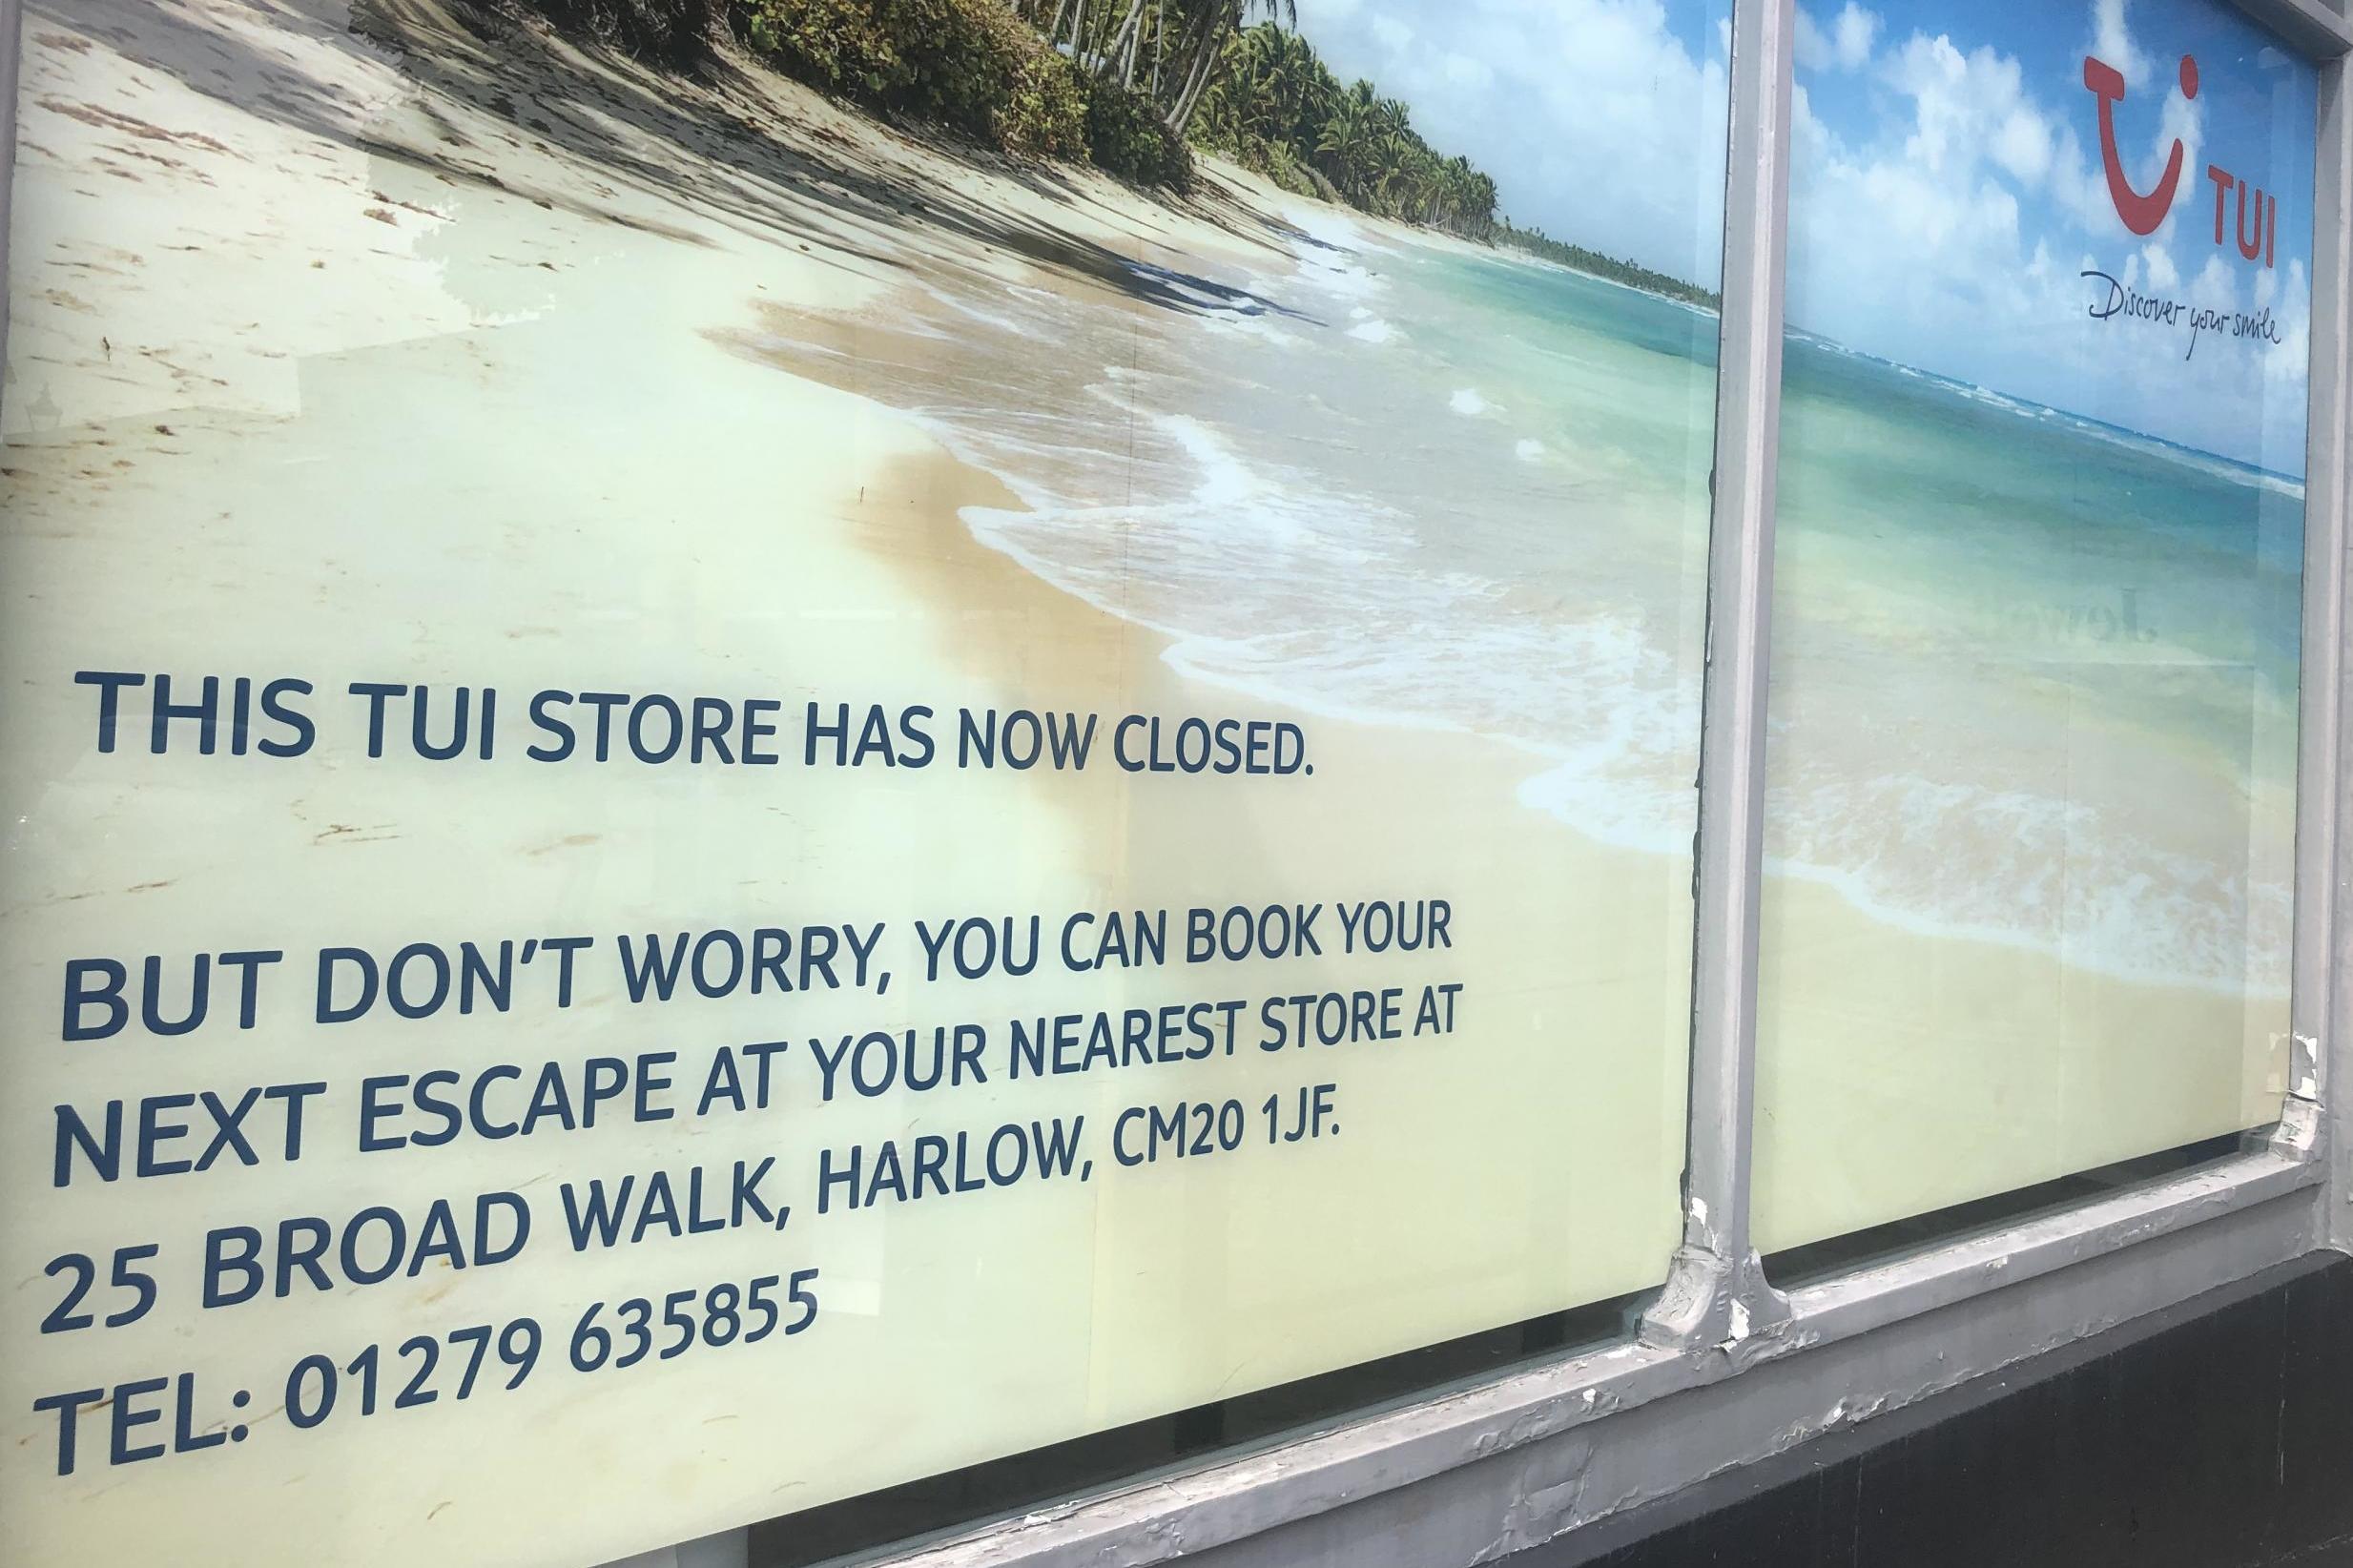 Closing down: a Tui store in Bishop's Stortford